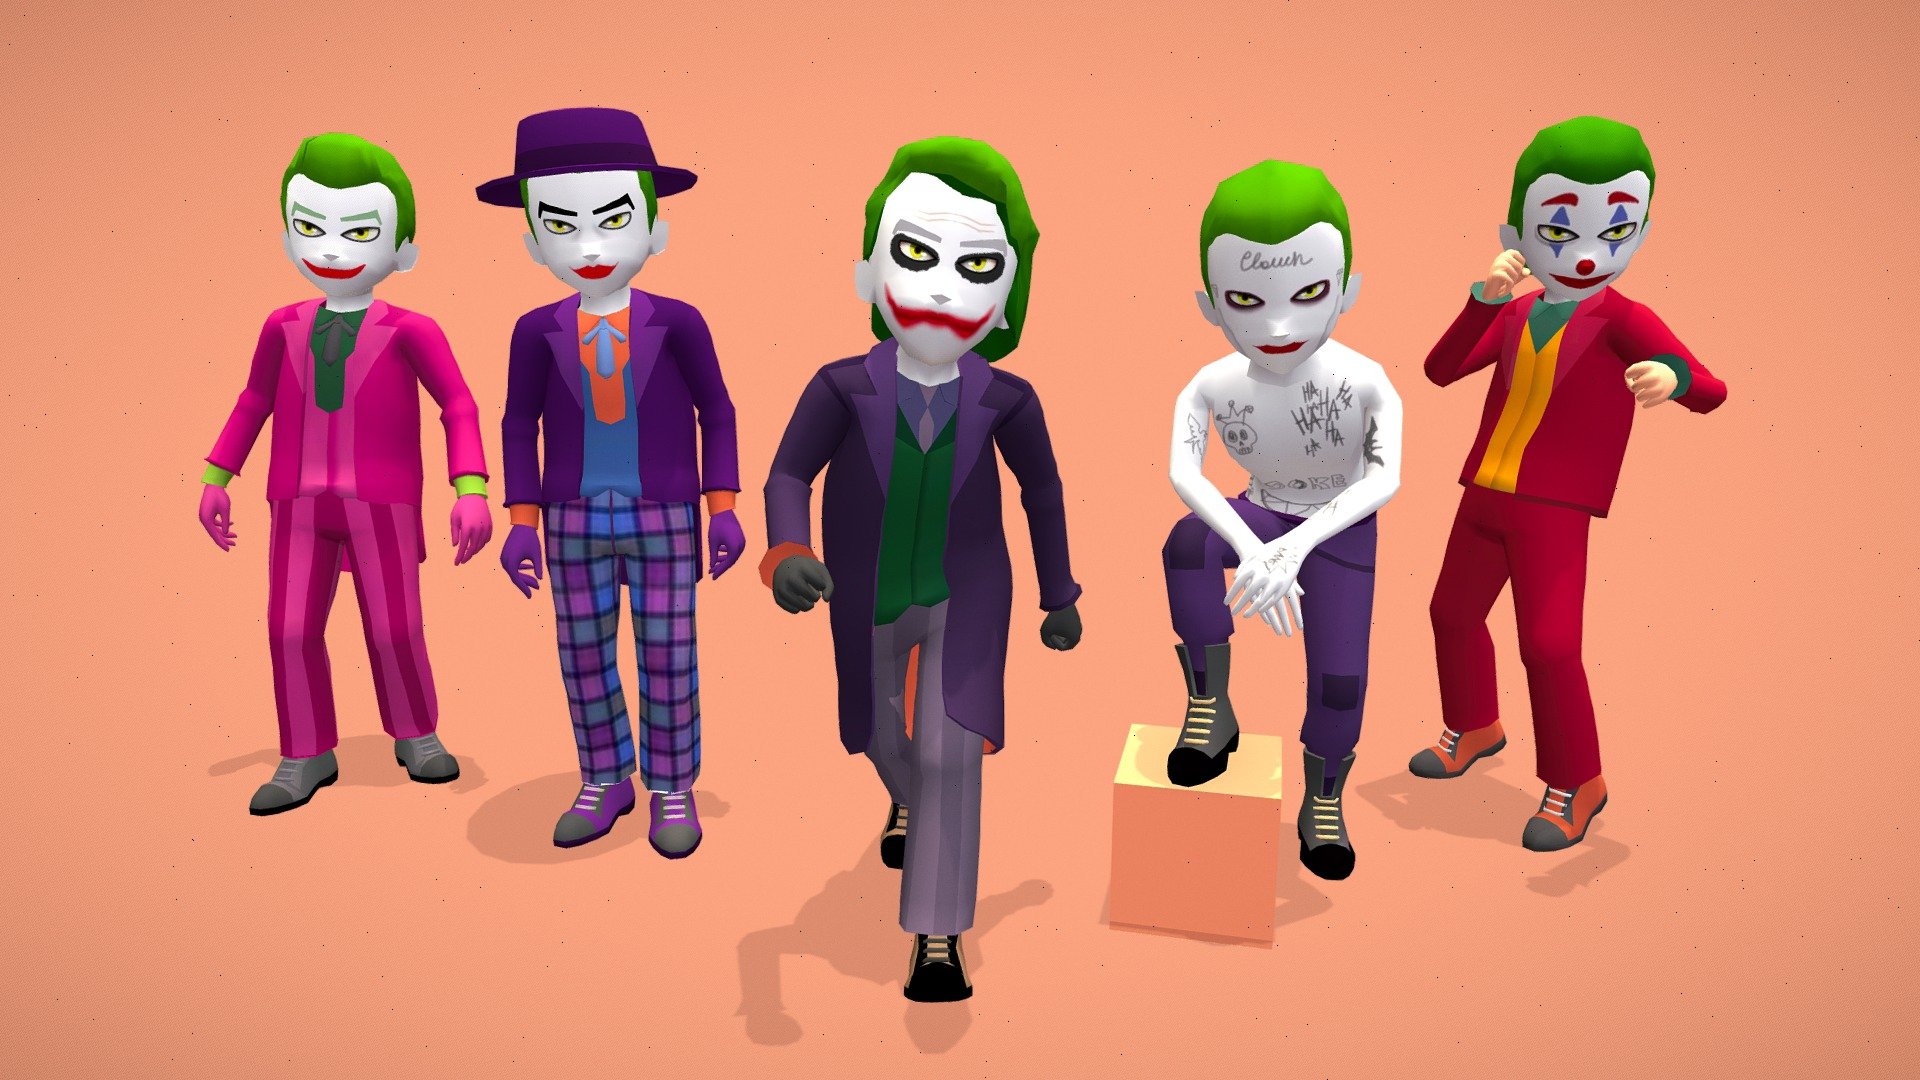 Joker - low poly 3D character. The pack includes several types of characters from different times and interpretations of the comic character.

The pack includes 5 types of Joker character. Each of the characters is a cartoon version of a character from the various films in which the character has been.

5 separate types of character meshes, each with a rig and overall texture

*animations not included

Number of textures - 1
Texture dimensions - 512x512
Polygon count of [Joker_1] - 5100 triangles
Polygon count of [Joker_2] - 5319 triangles
Polygon count of [Joker_3] - 5312 triangles
Polygon count of [Joker_4] - 4622 triangles
Polygon count of [Joker_5] - 4721 triangles
Number of meshes/prefabs - 5
Rigging - Yes
UV mapping -Yes

*animations not included - Joker - low poly 3D character - 3D model by Colorful Lions Studio (@colorfullionsstudio) 3d model